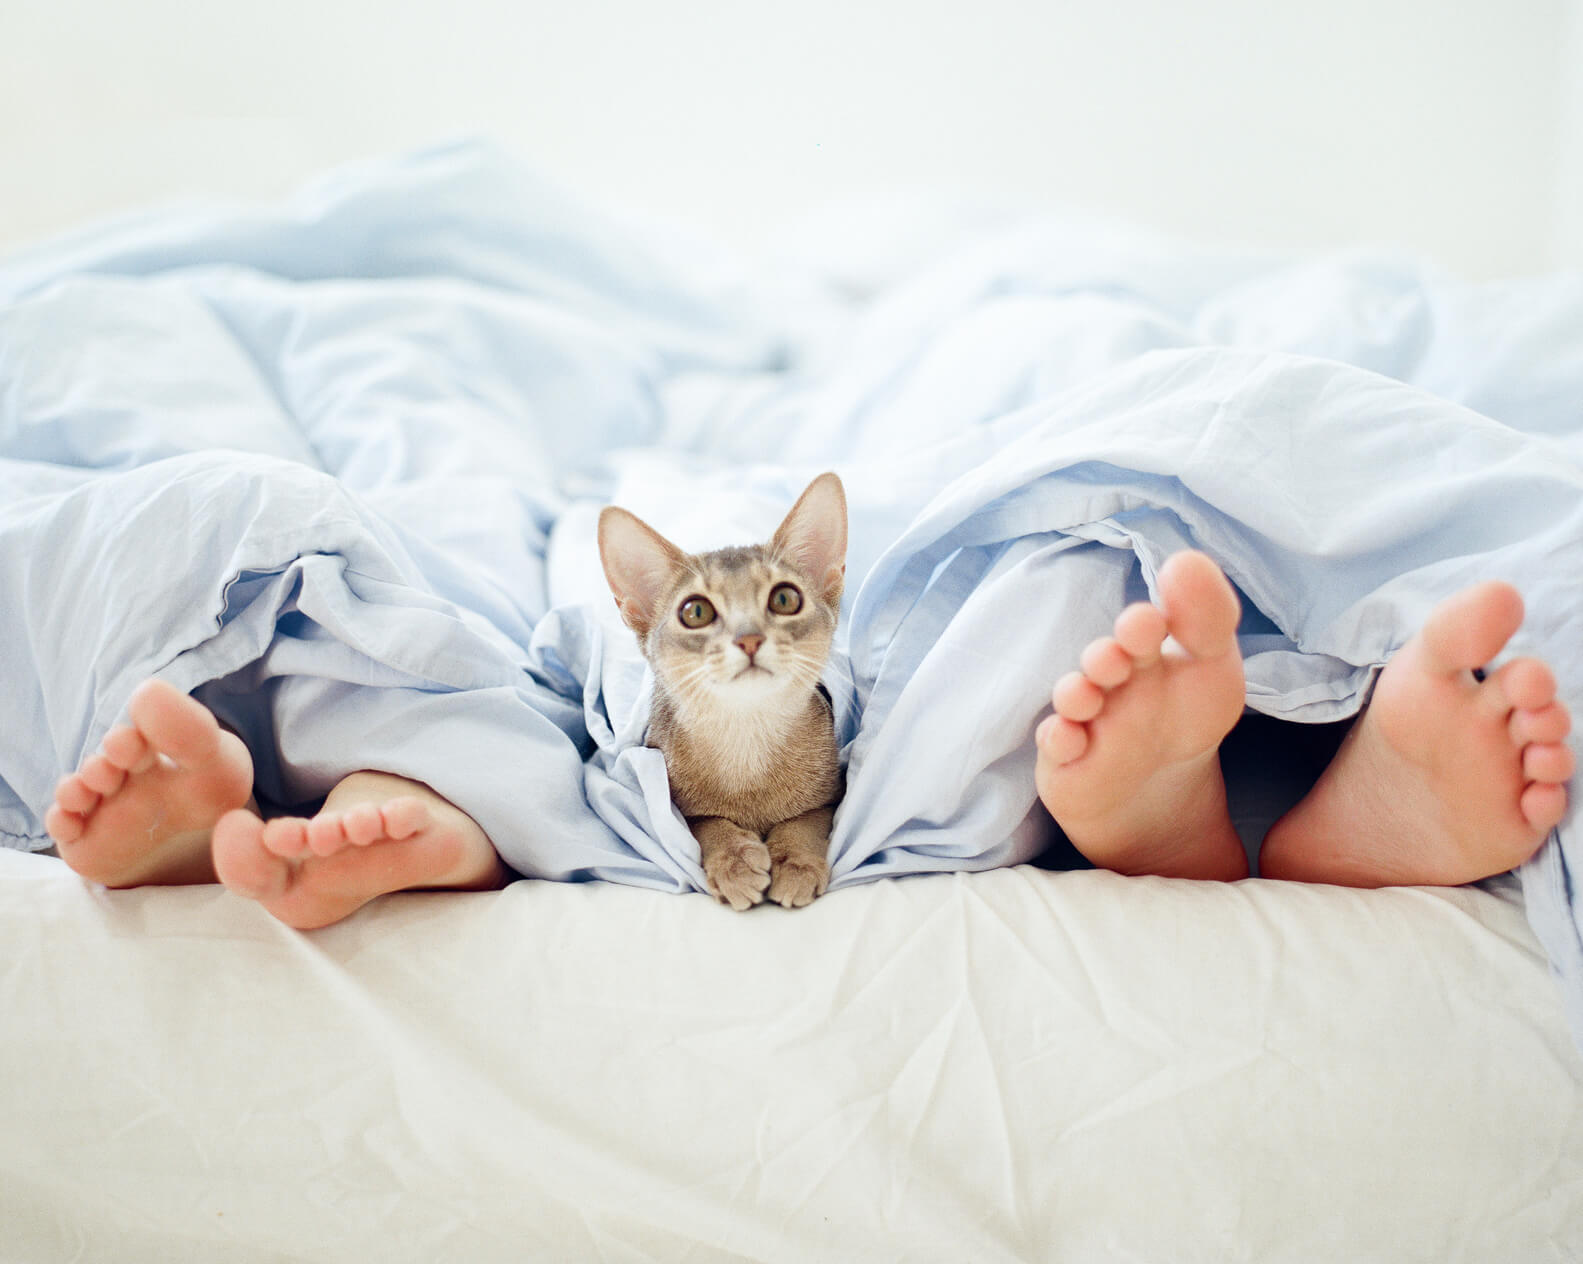 Couple's feet at the end of the bed with cute pet kitten sitting at the foot of the bed.